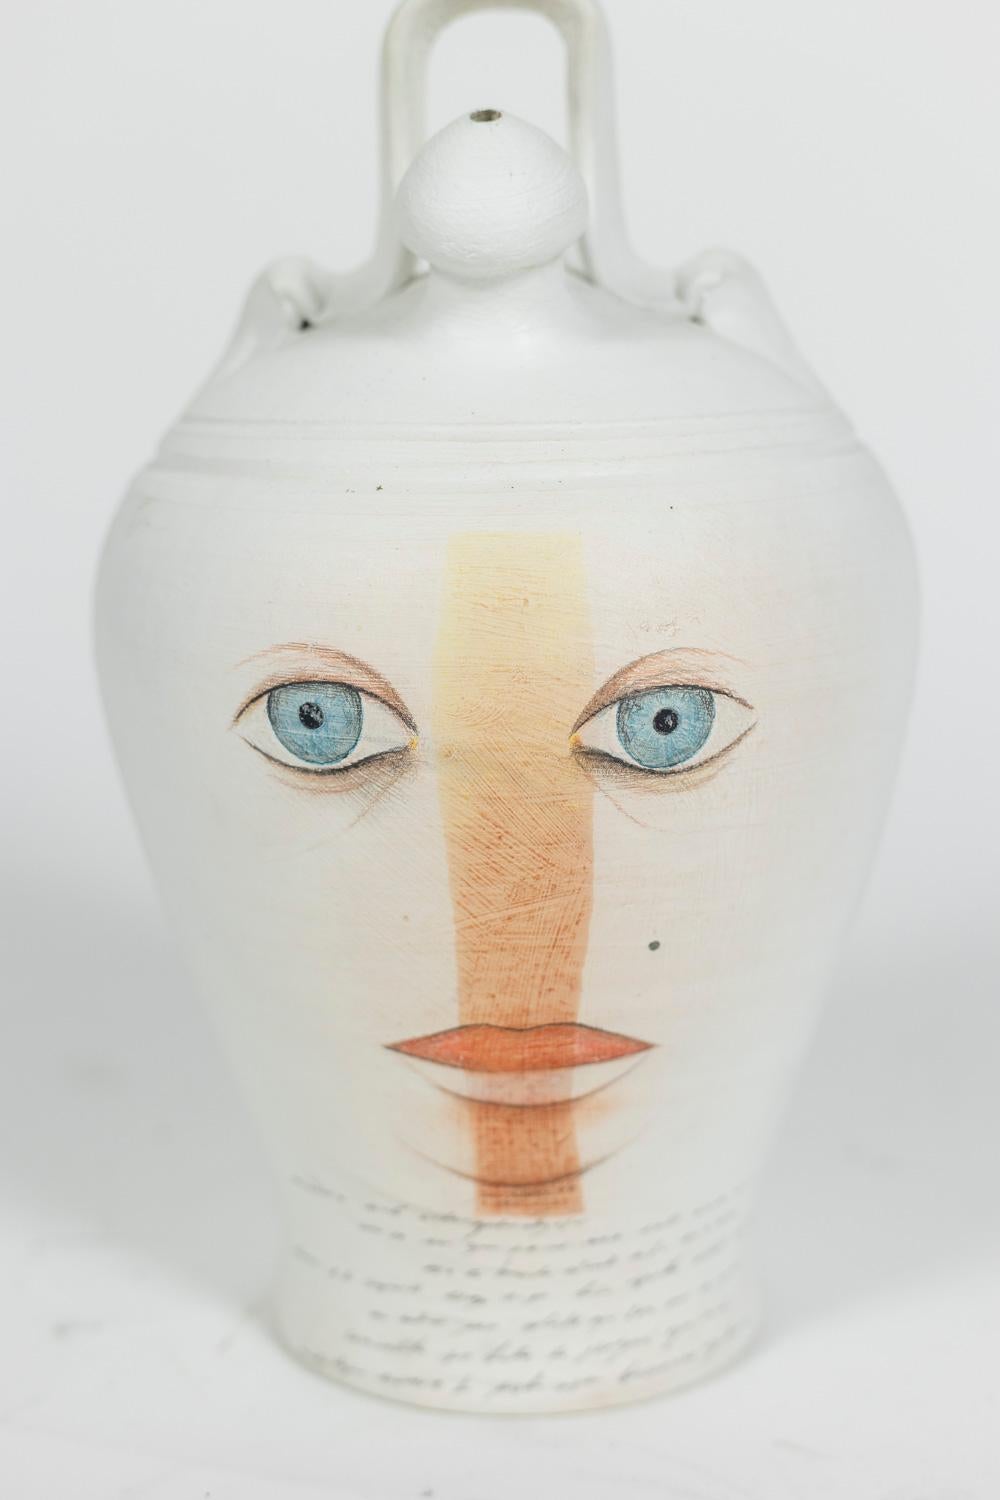 Painted terracotta vase, surreal style and round shape. Face in blue and orange tones on an background in white color.

Contemporary work.